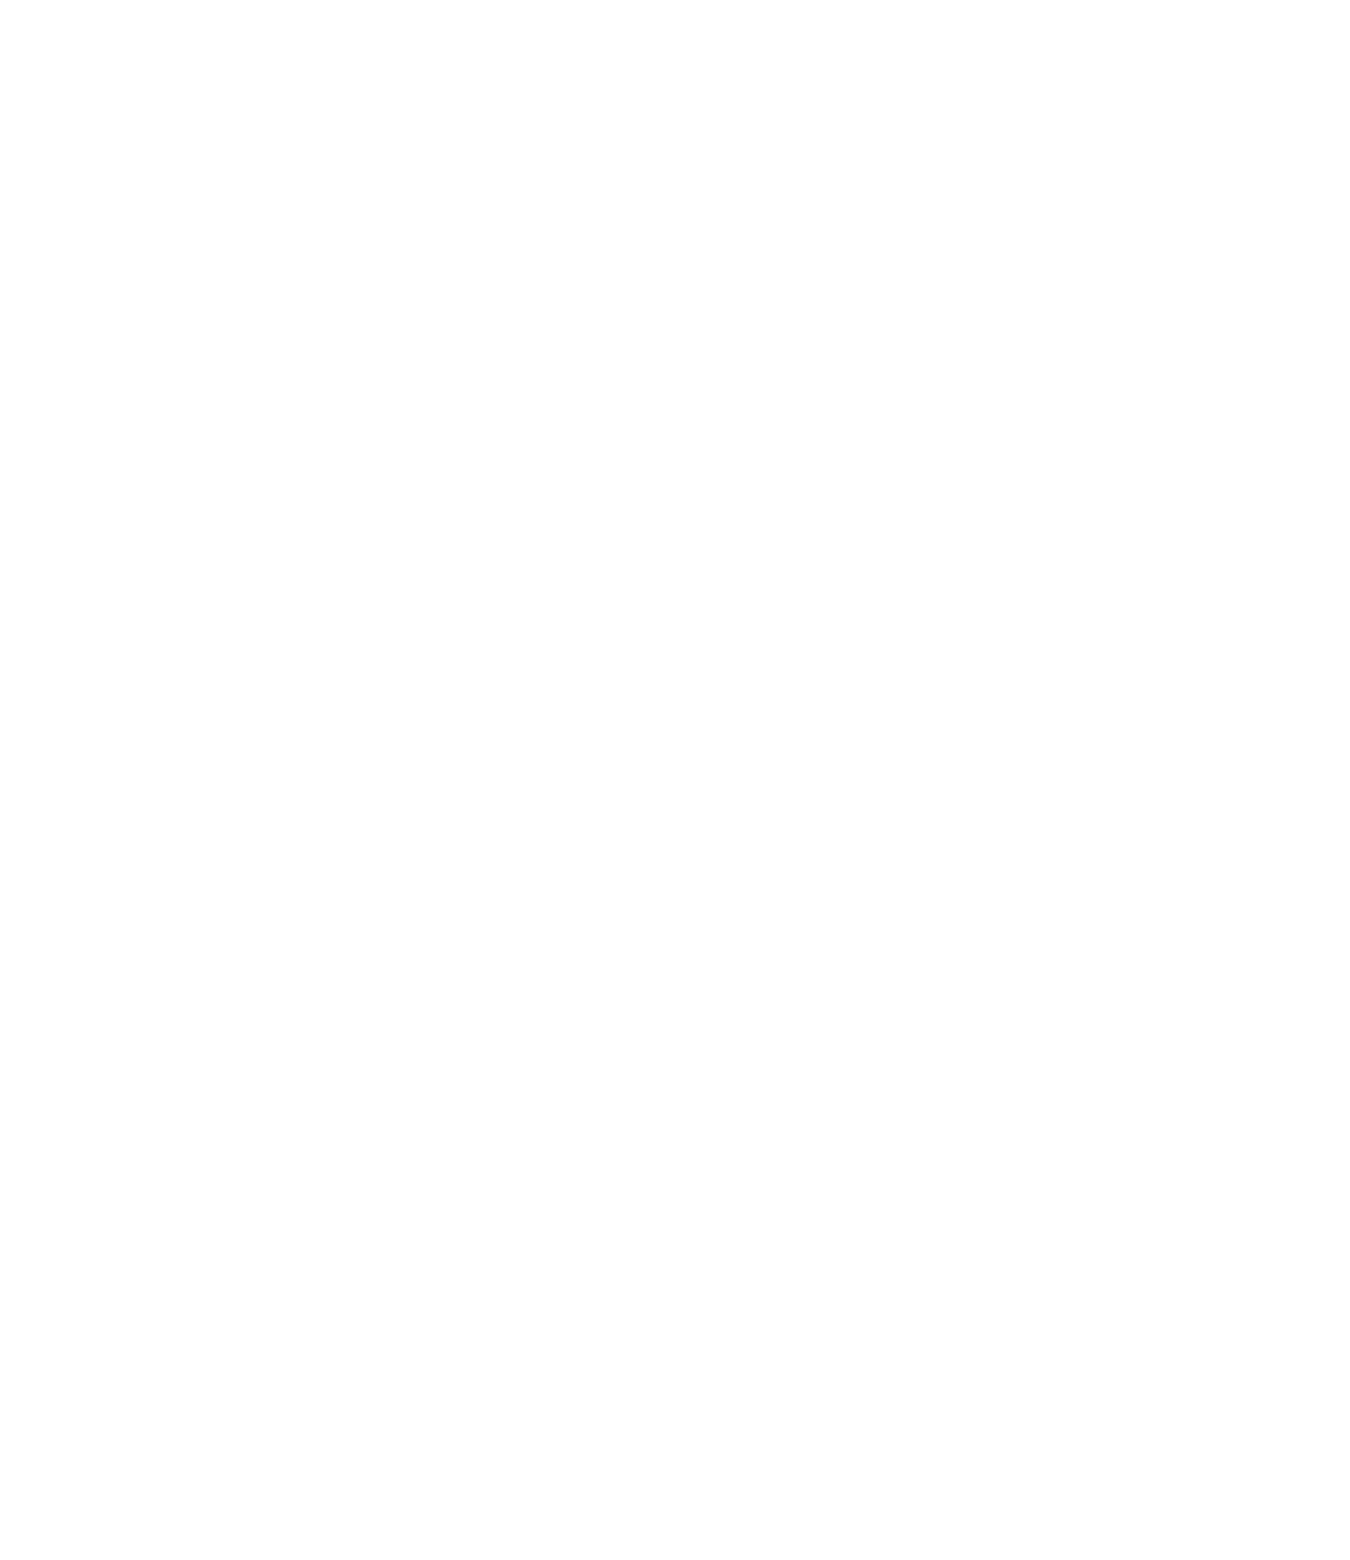 Diagram of 3D coordinate axes with labeled x, y, and z axes on a black background